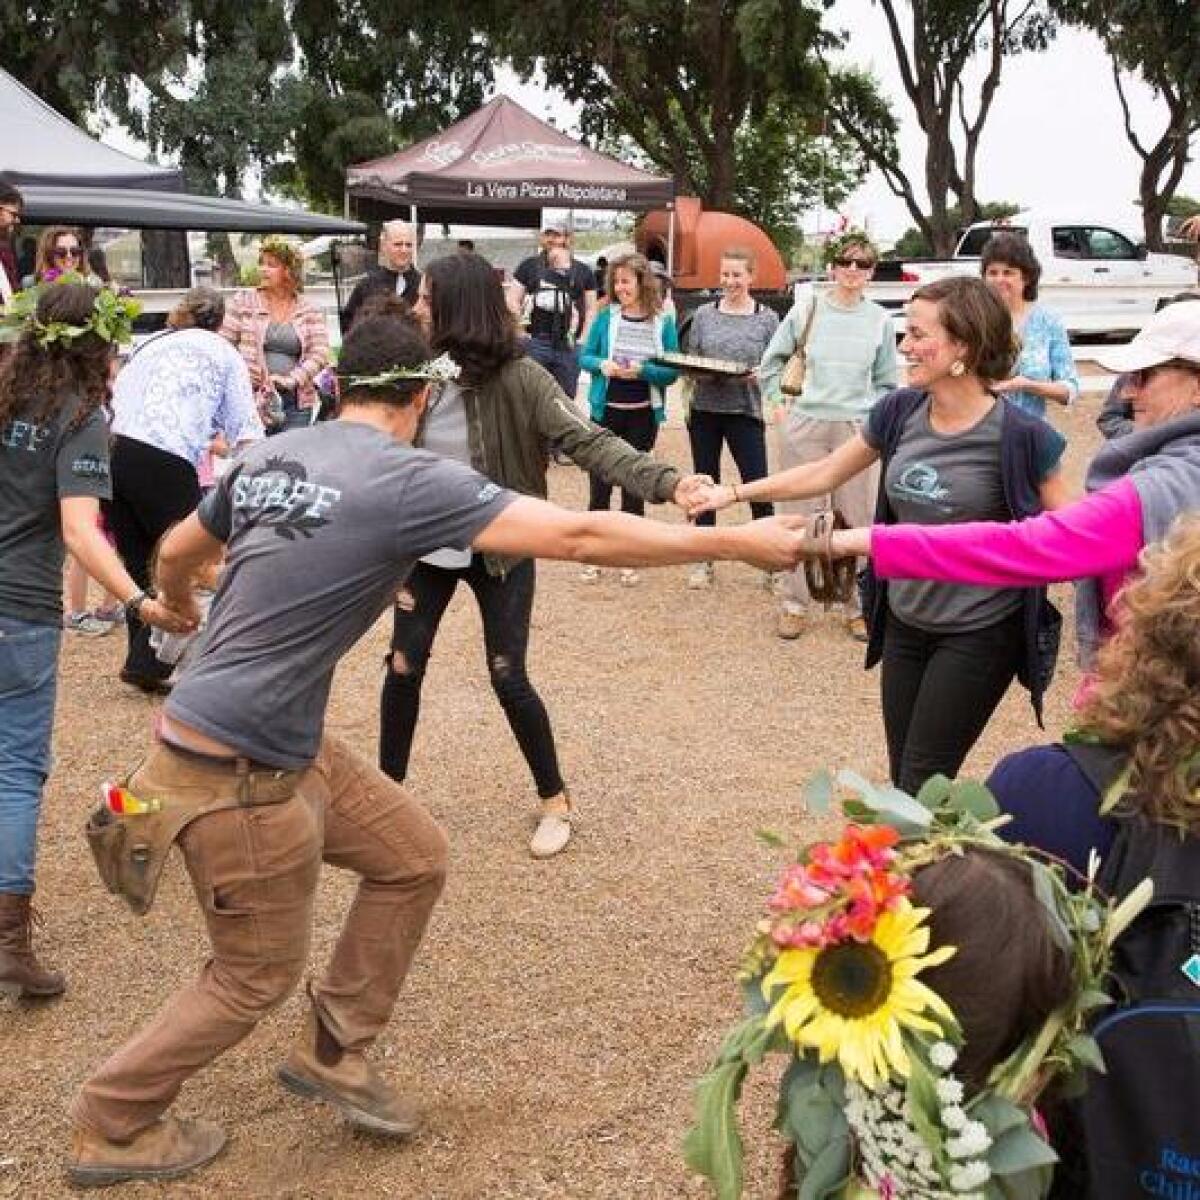 The 7th Annual Sukkot Harvest Festival will take place Oct. 20 at Coastal Roots Farm.